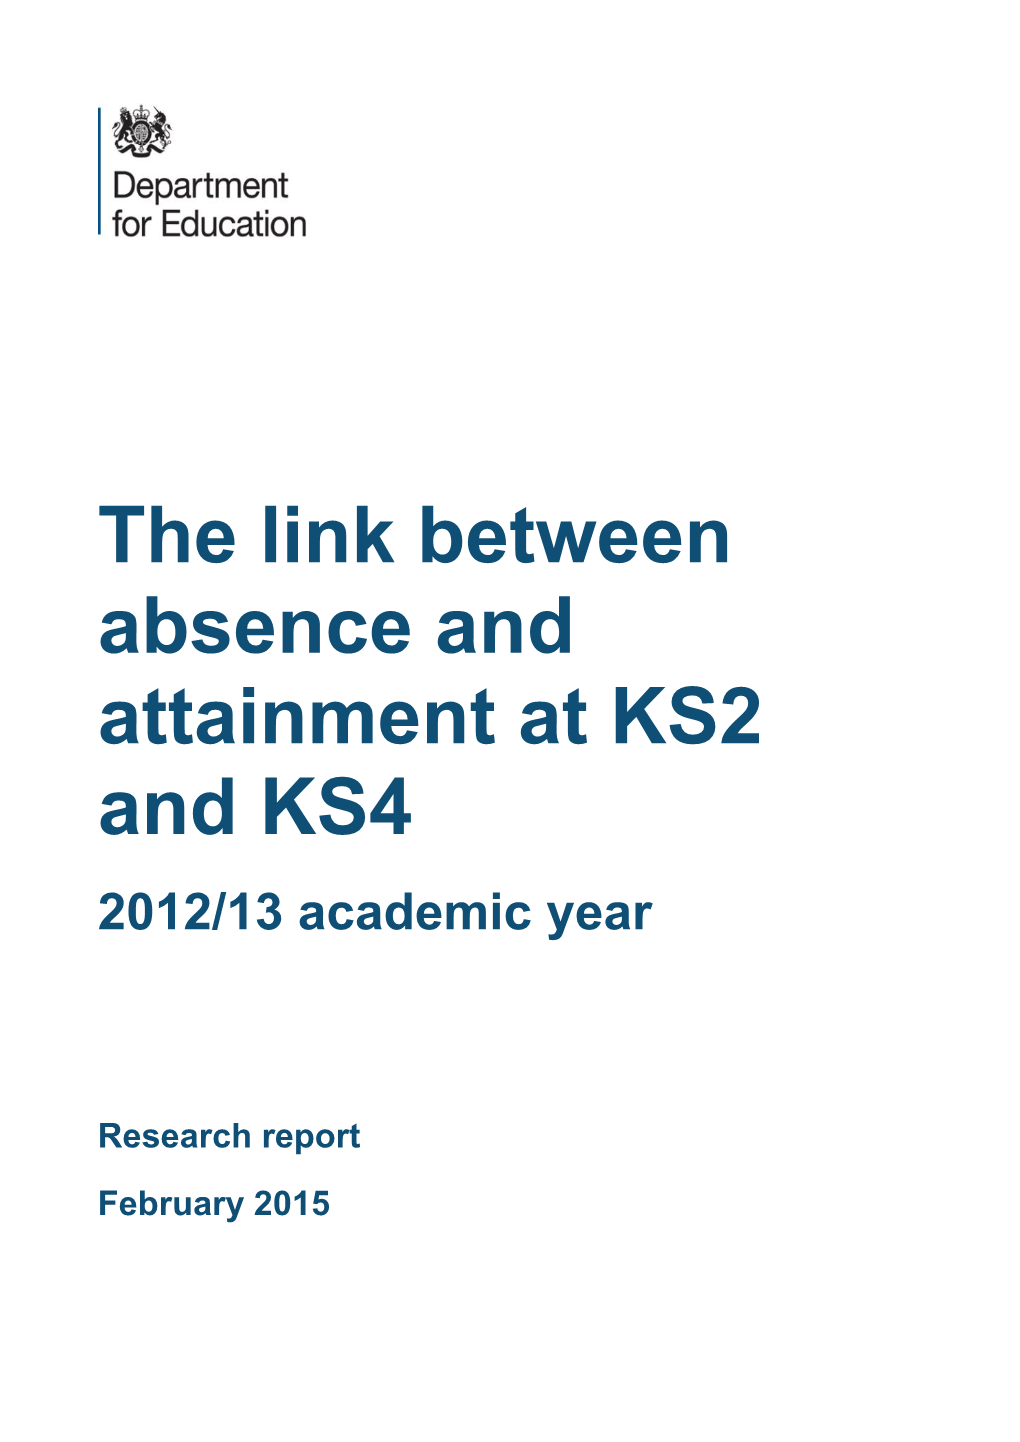 The Link Between Absence and Attainment at KS2 and KS4 2012/13 Academic Year